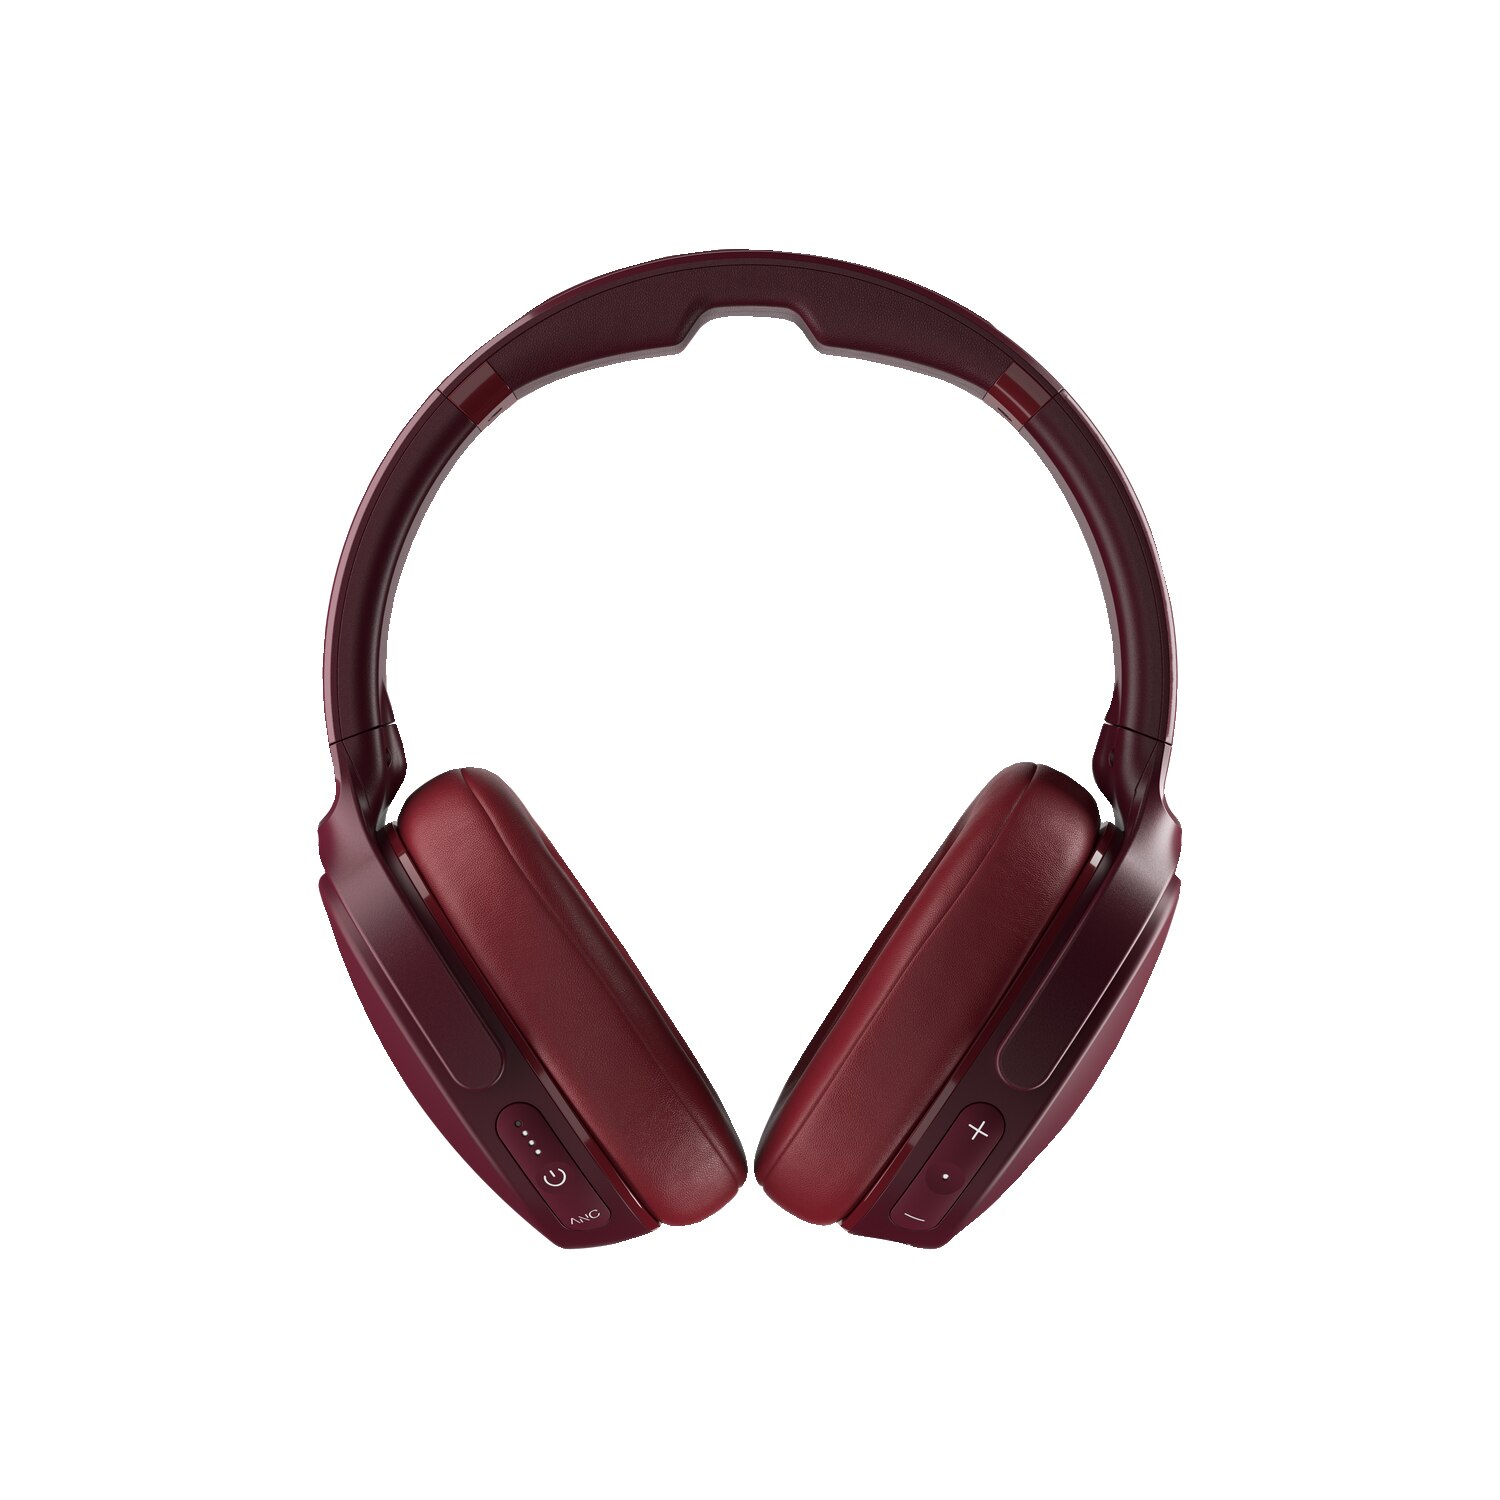 Venue Wireless ANC Over-Ear Headphones with Mic